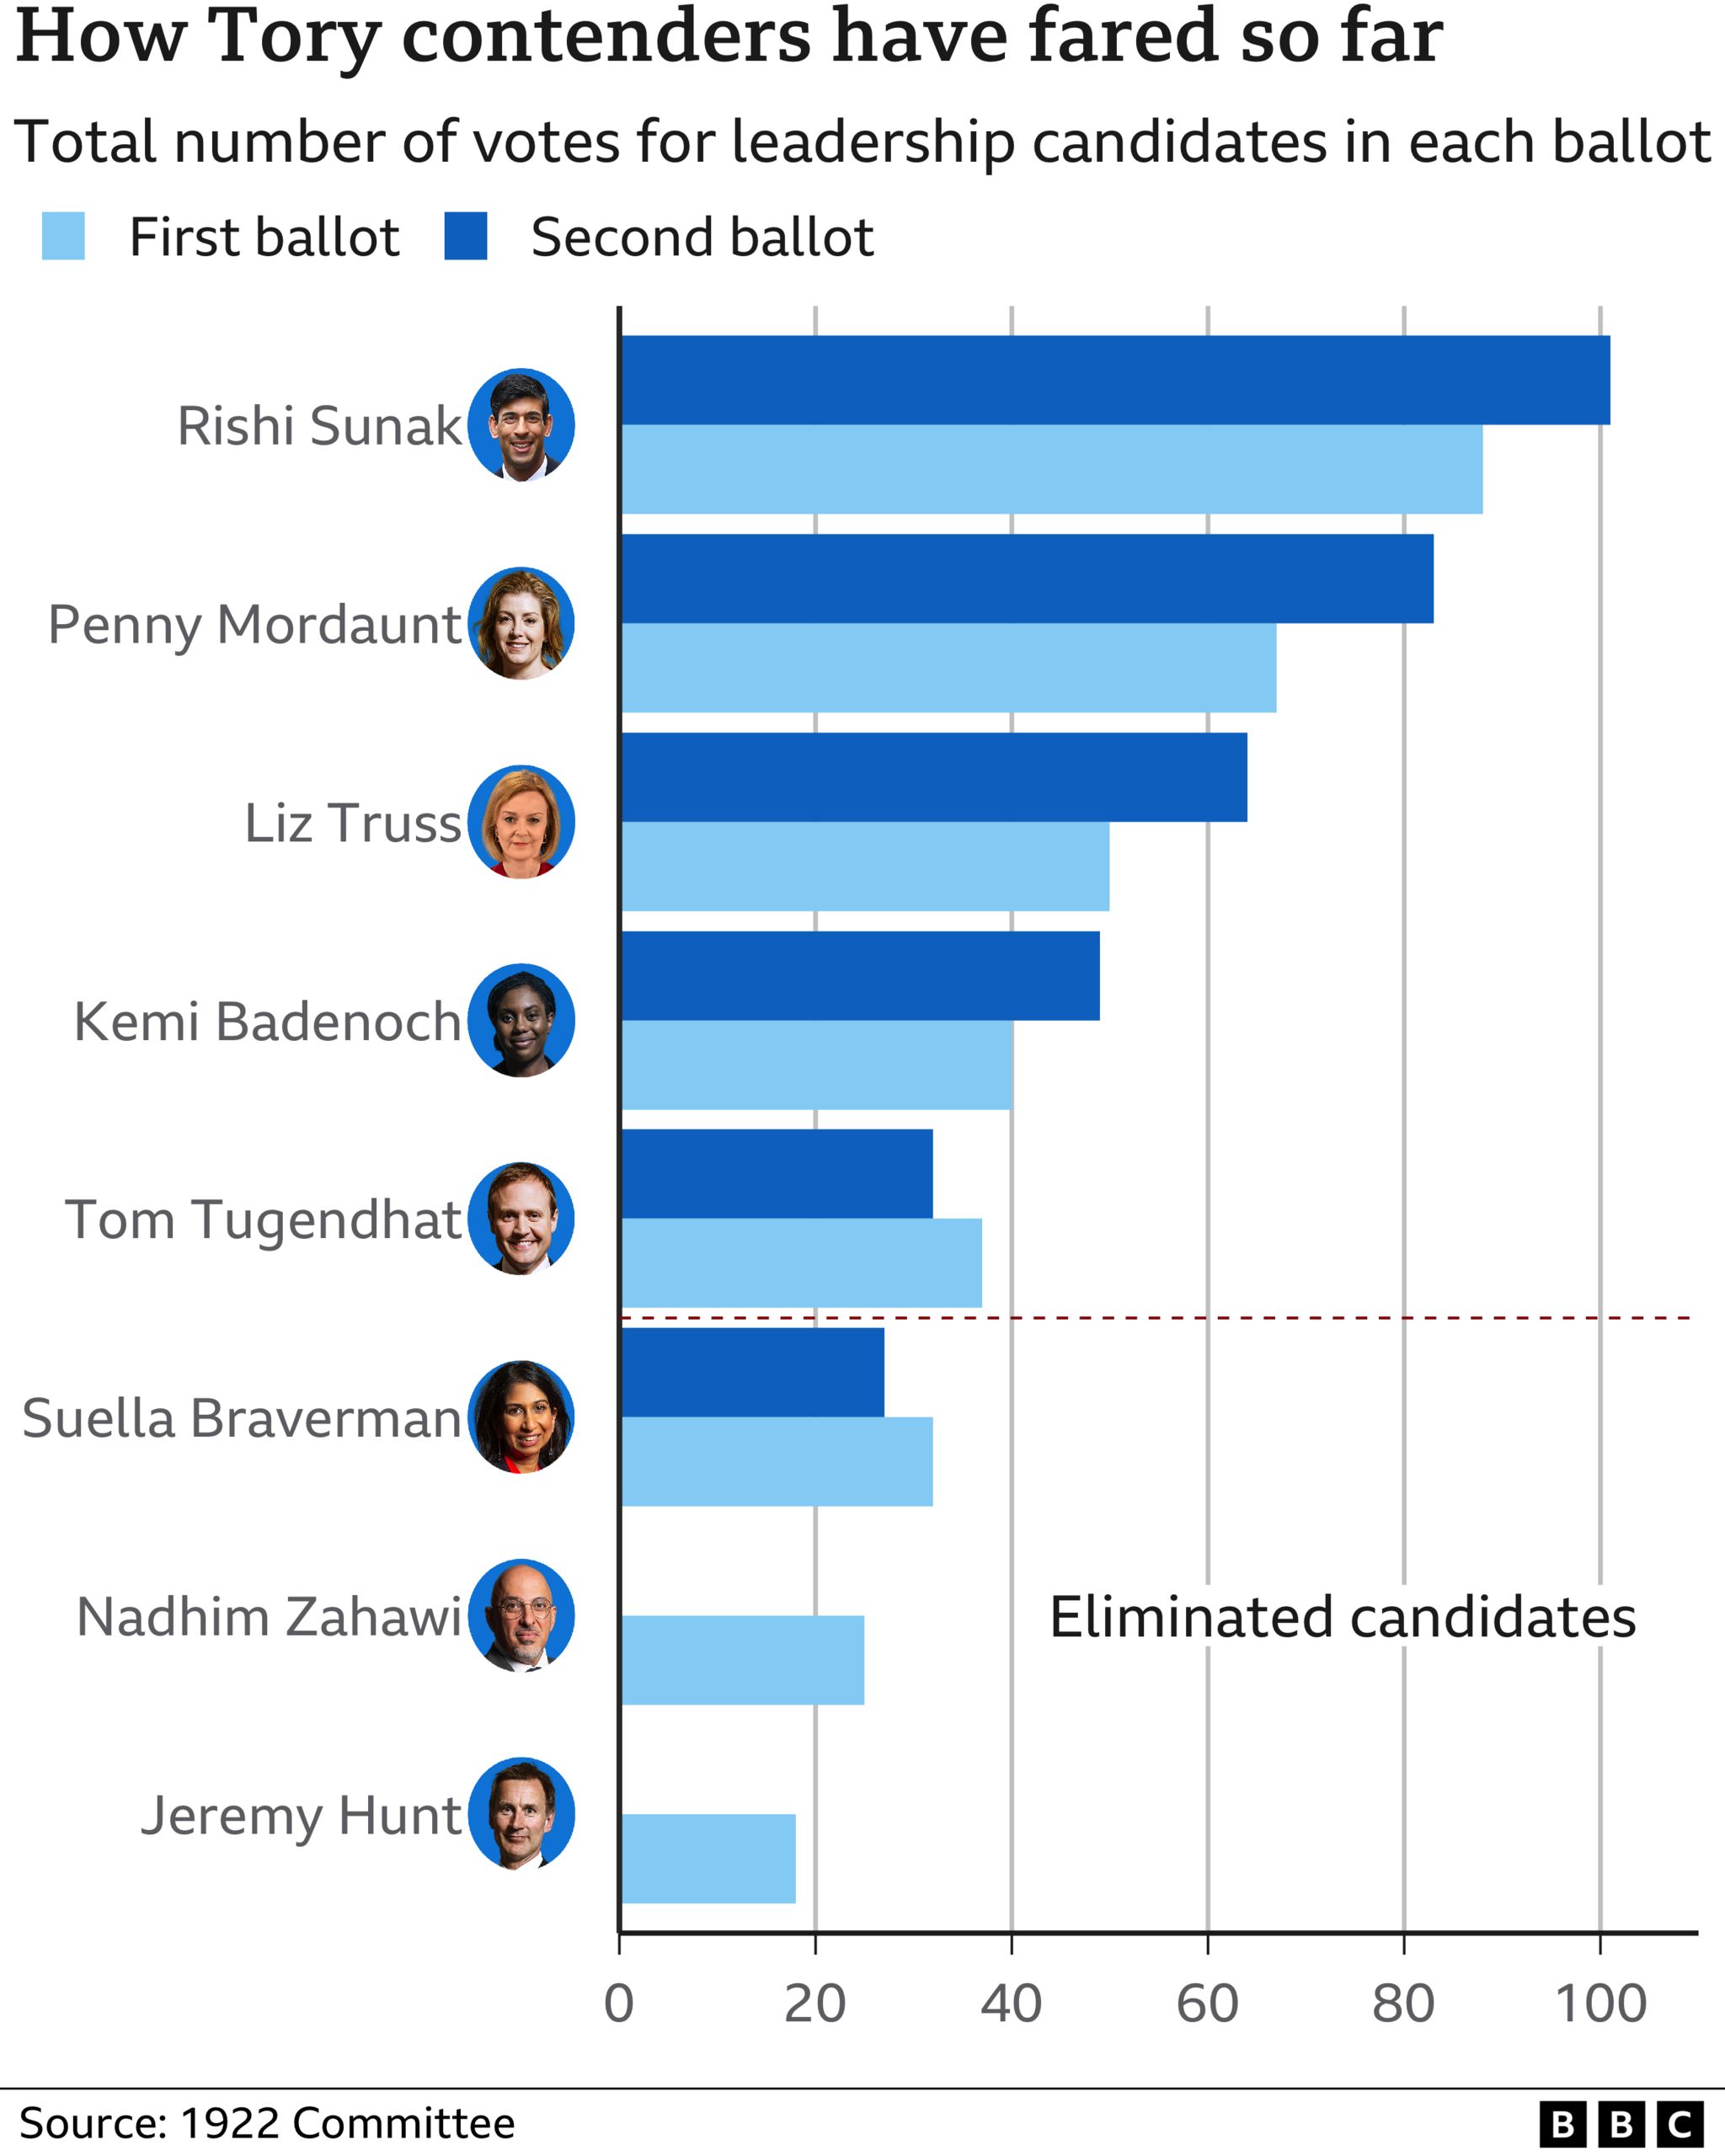 How Tory candidates have fared so far in leadership contests